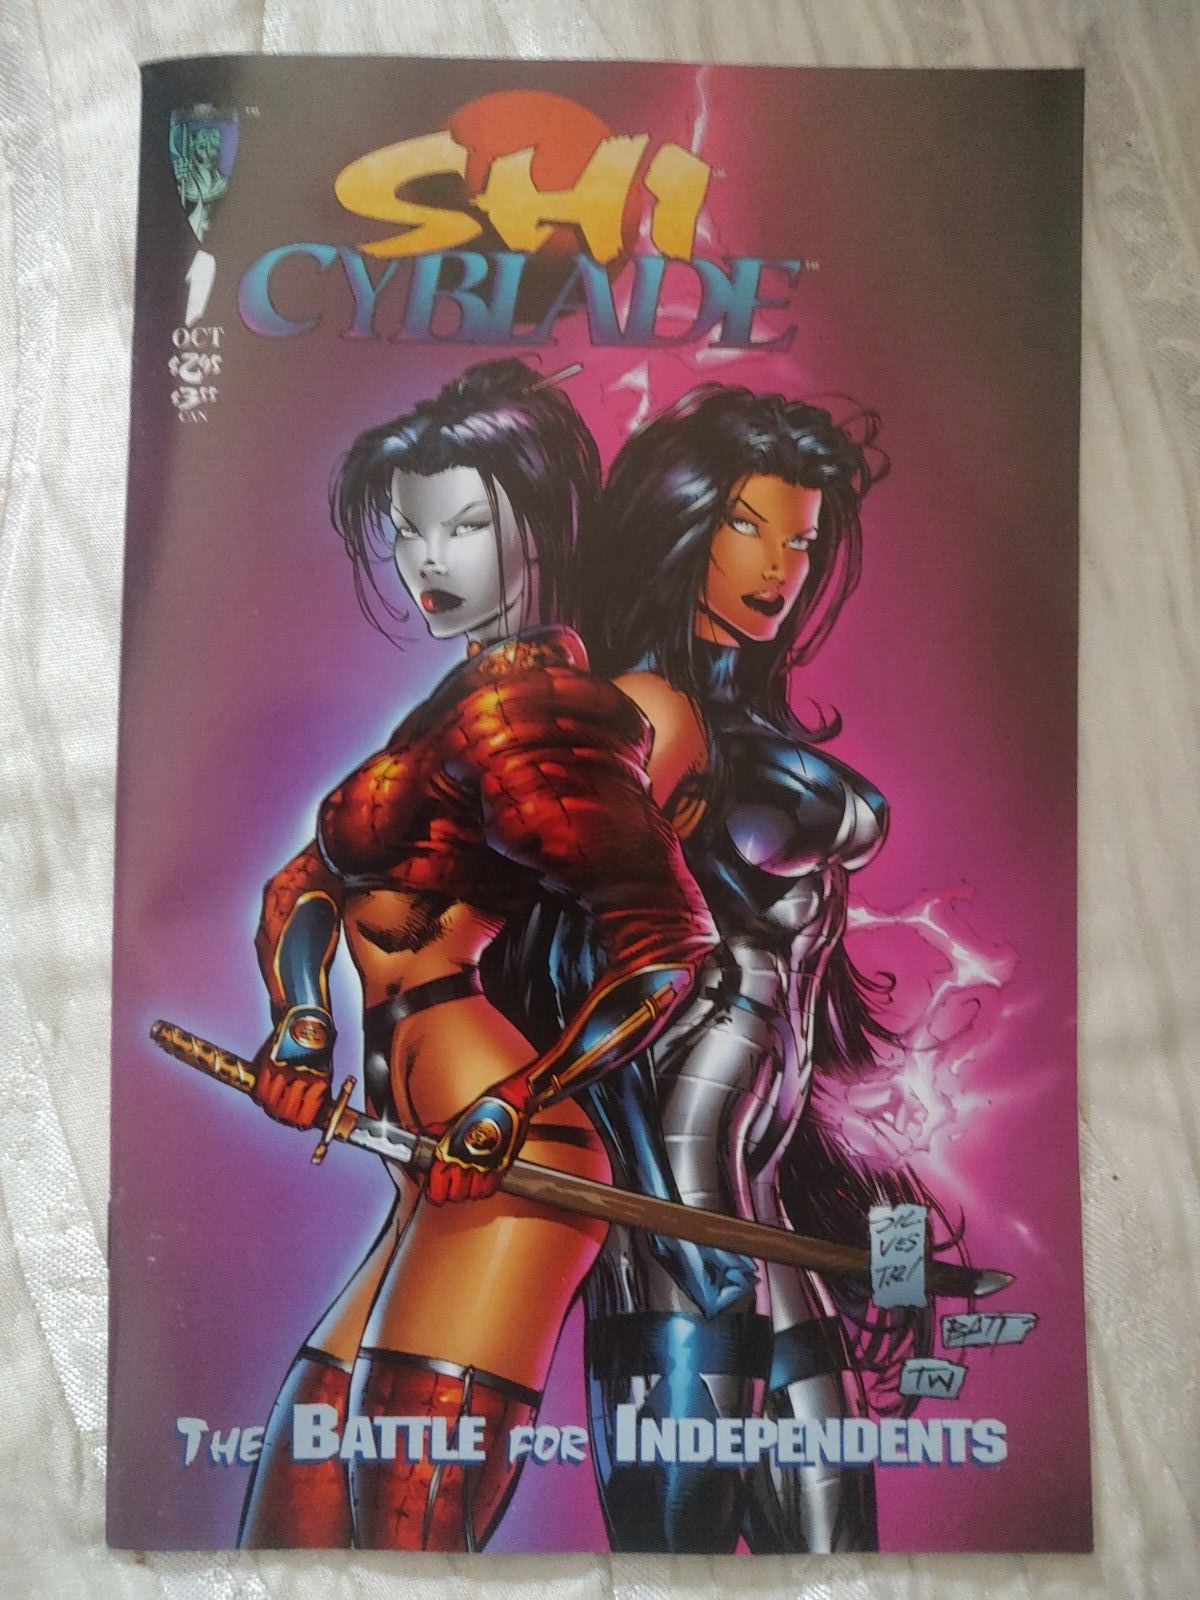 Cb39~comic book~rare shi cyblade the battle for independent issue #1 Oct top cow